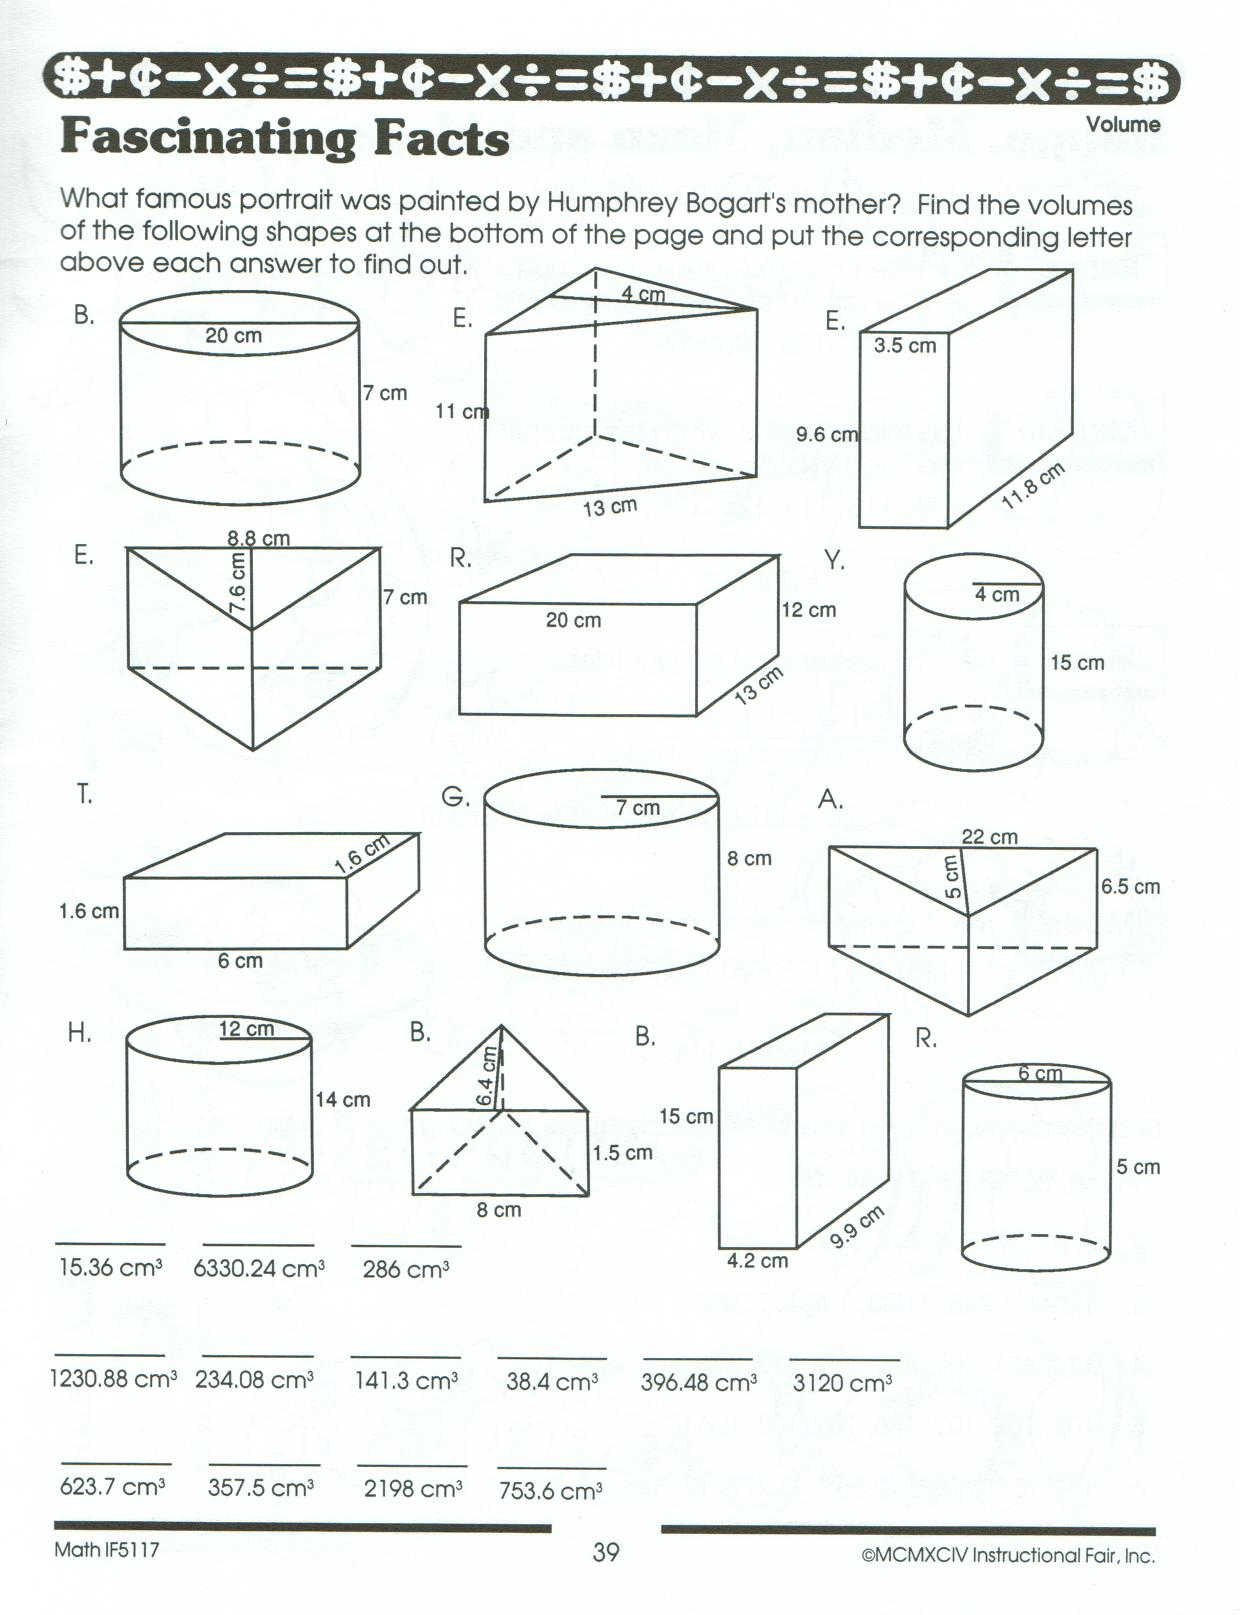 6th-grade-volume-and-surface-area-worksheets-tutoreorg-master-of